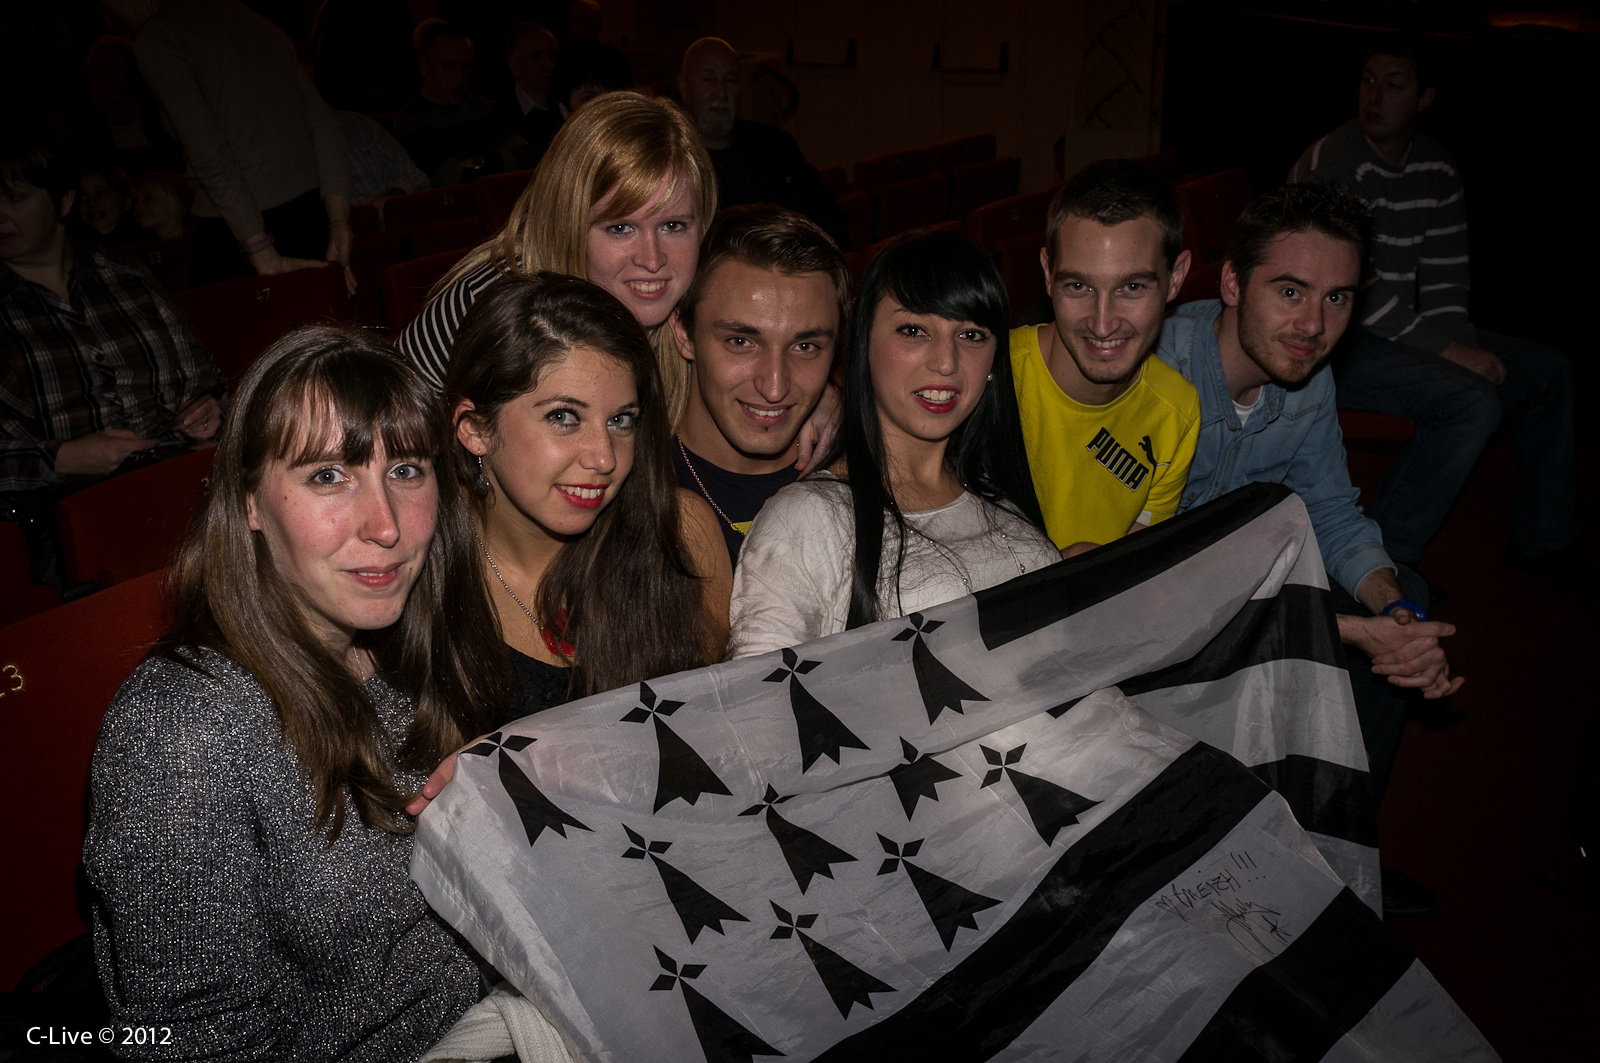 a group of people smiling while holding up a large flag